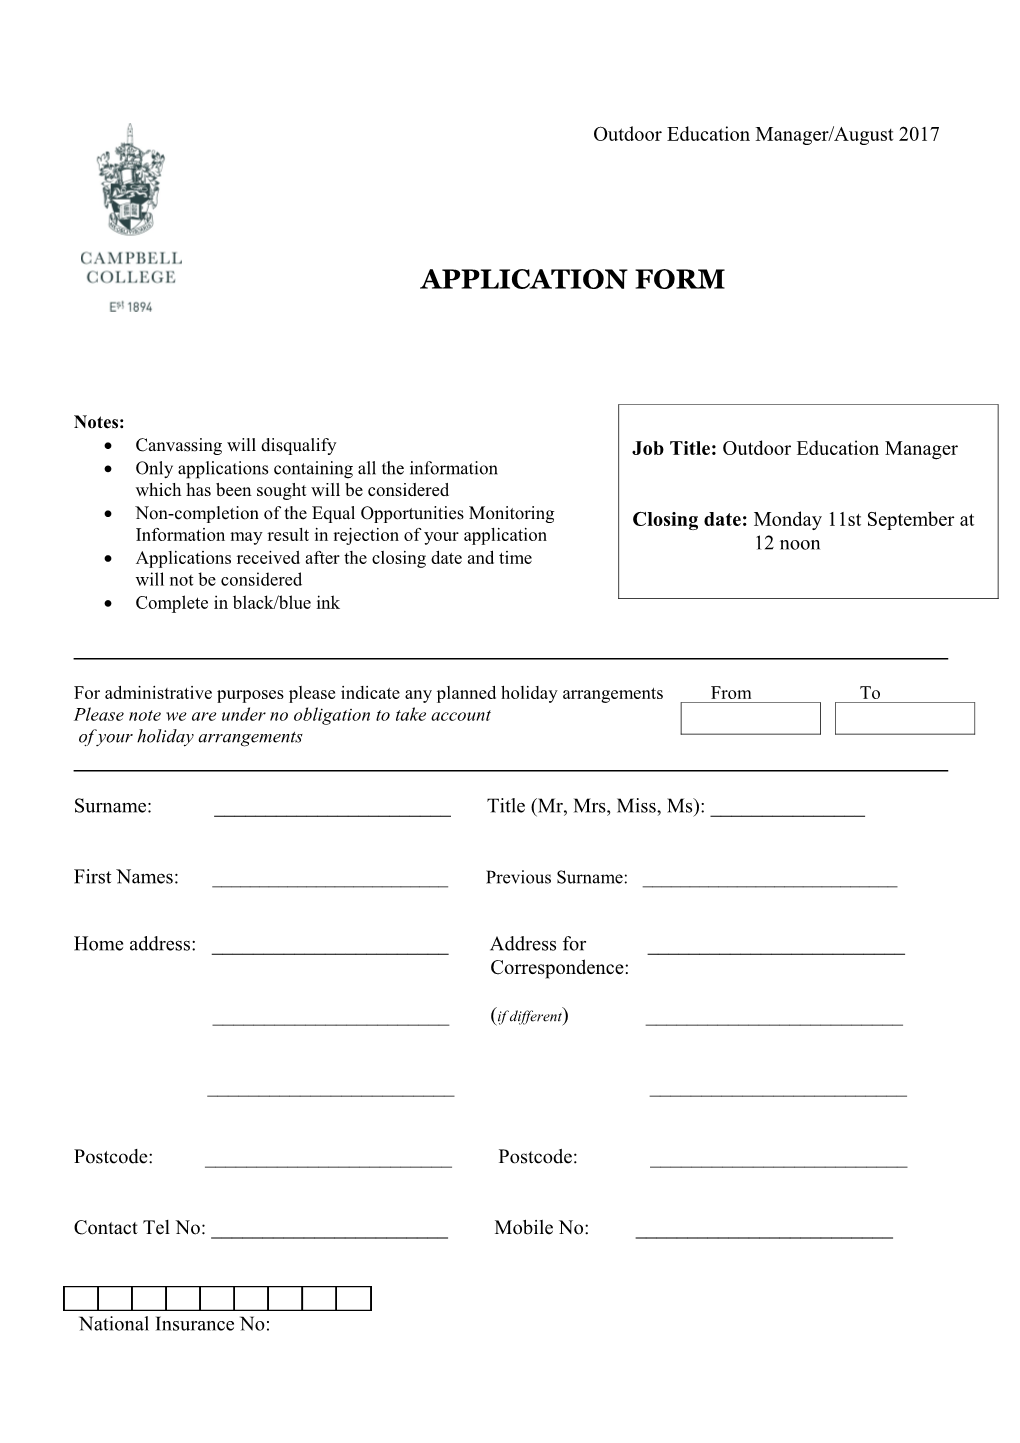 Only Applications Containing All the Information